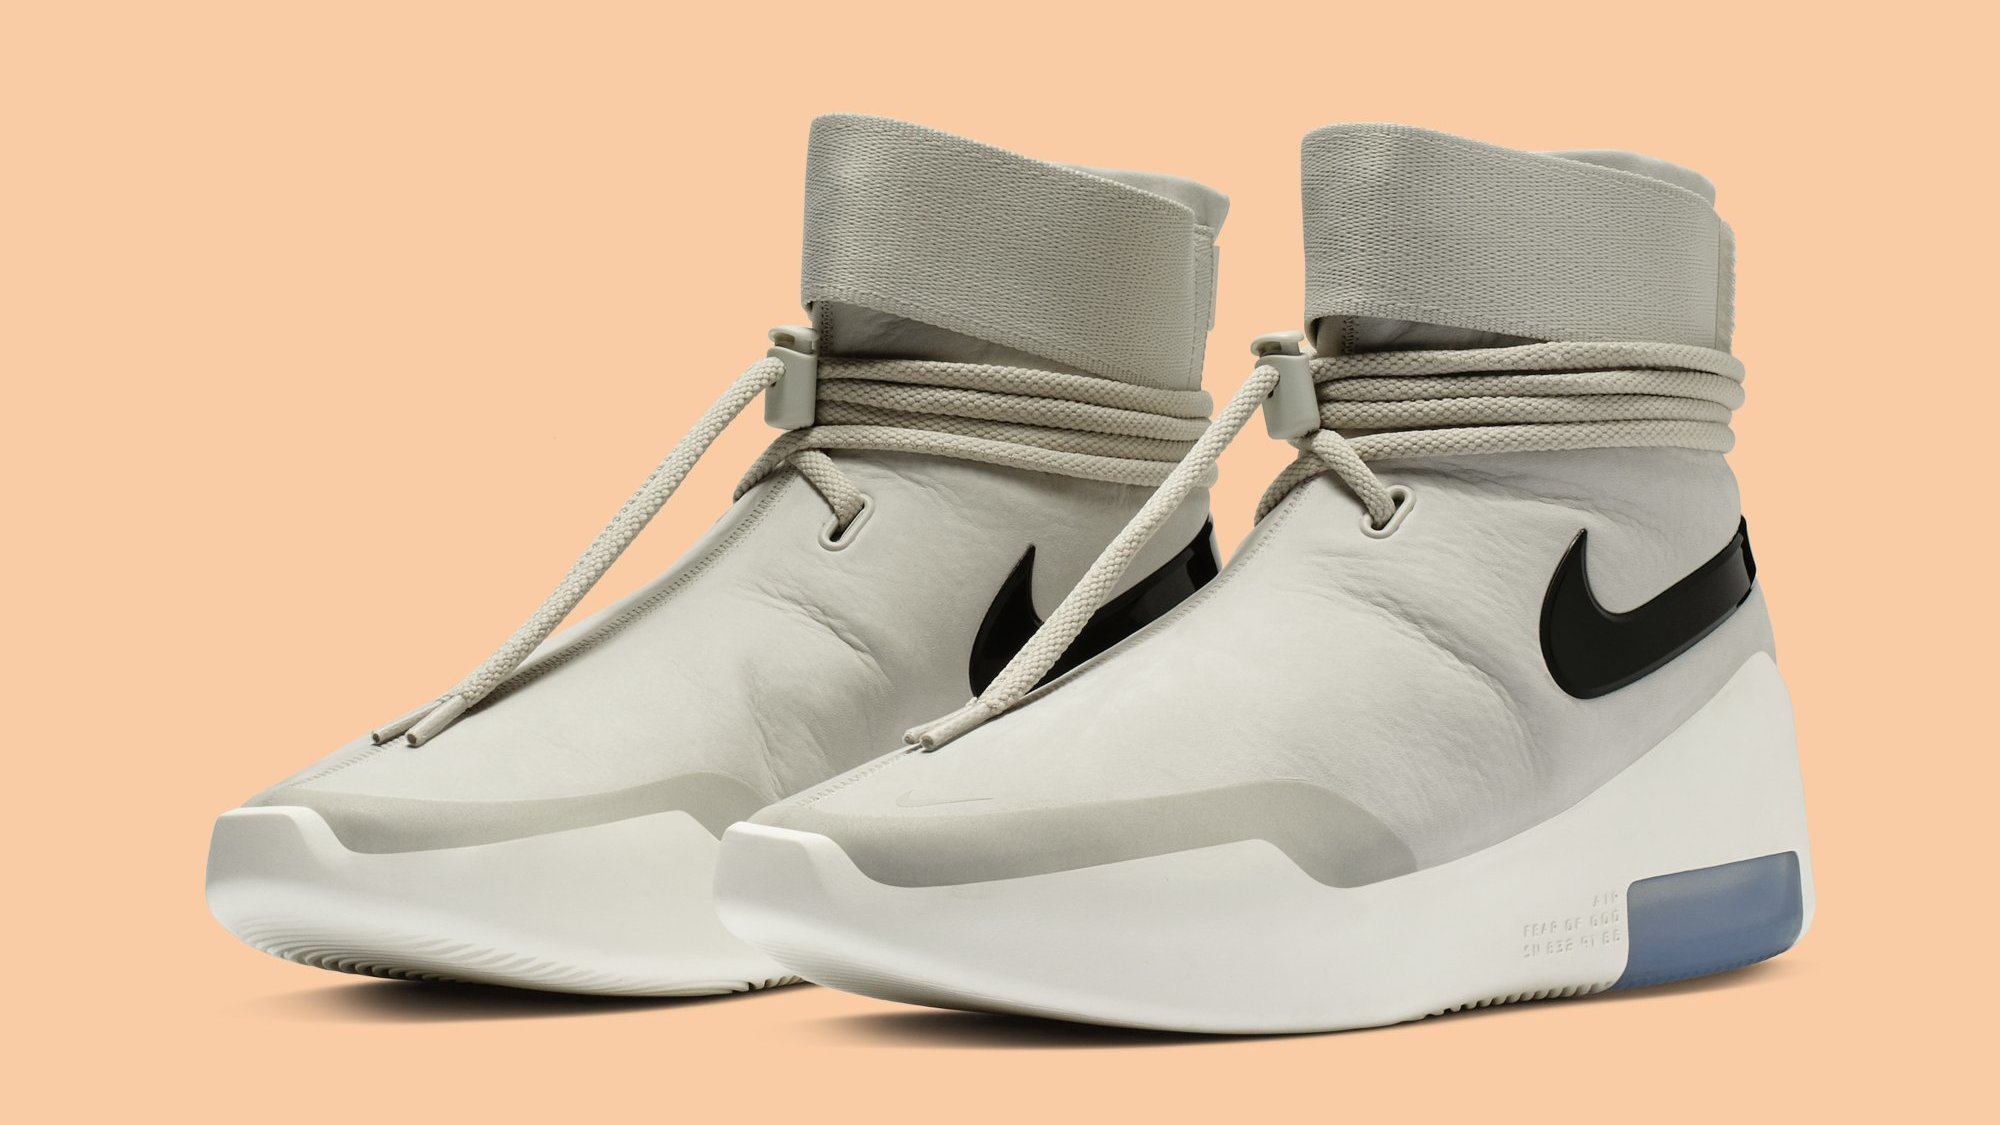 New Release Date for the 'Light Bone' Air Fear of God SA | Complex